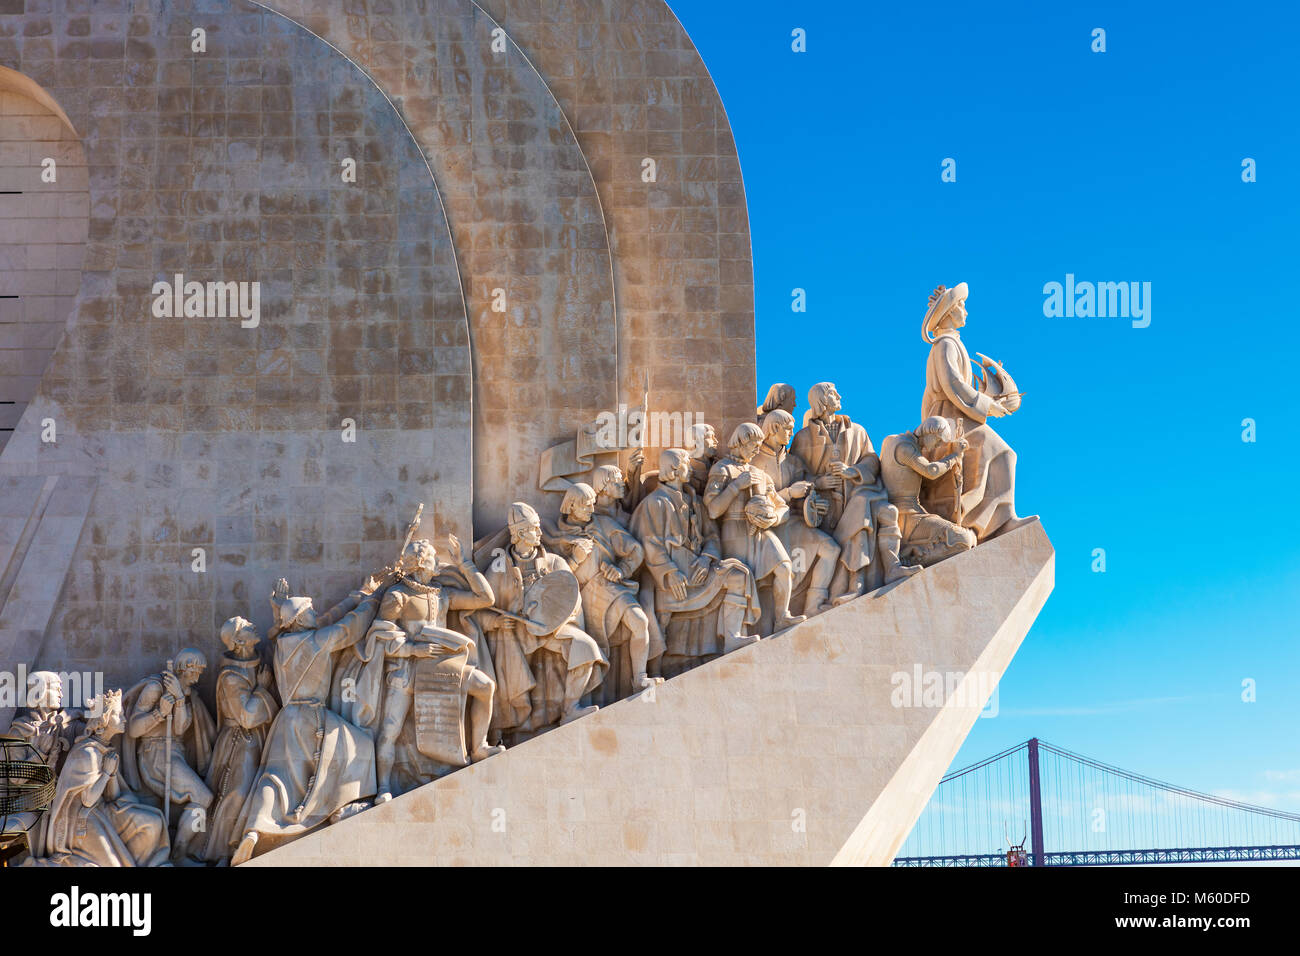 Detail of famous Monument of the Discoveries in Belem area of Lisbon, Portugal. Stock Photo